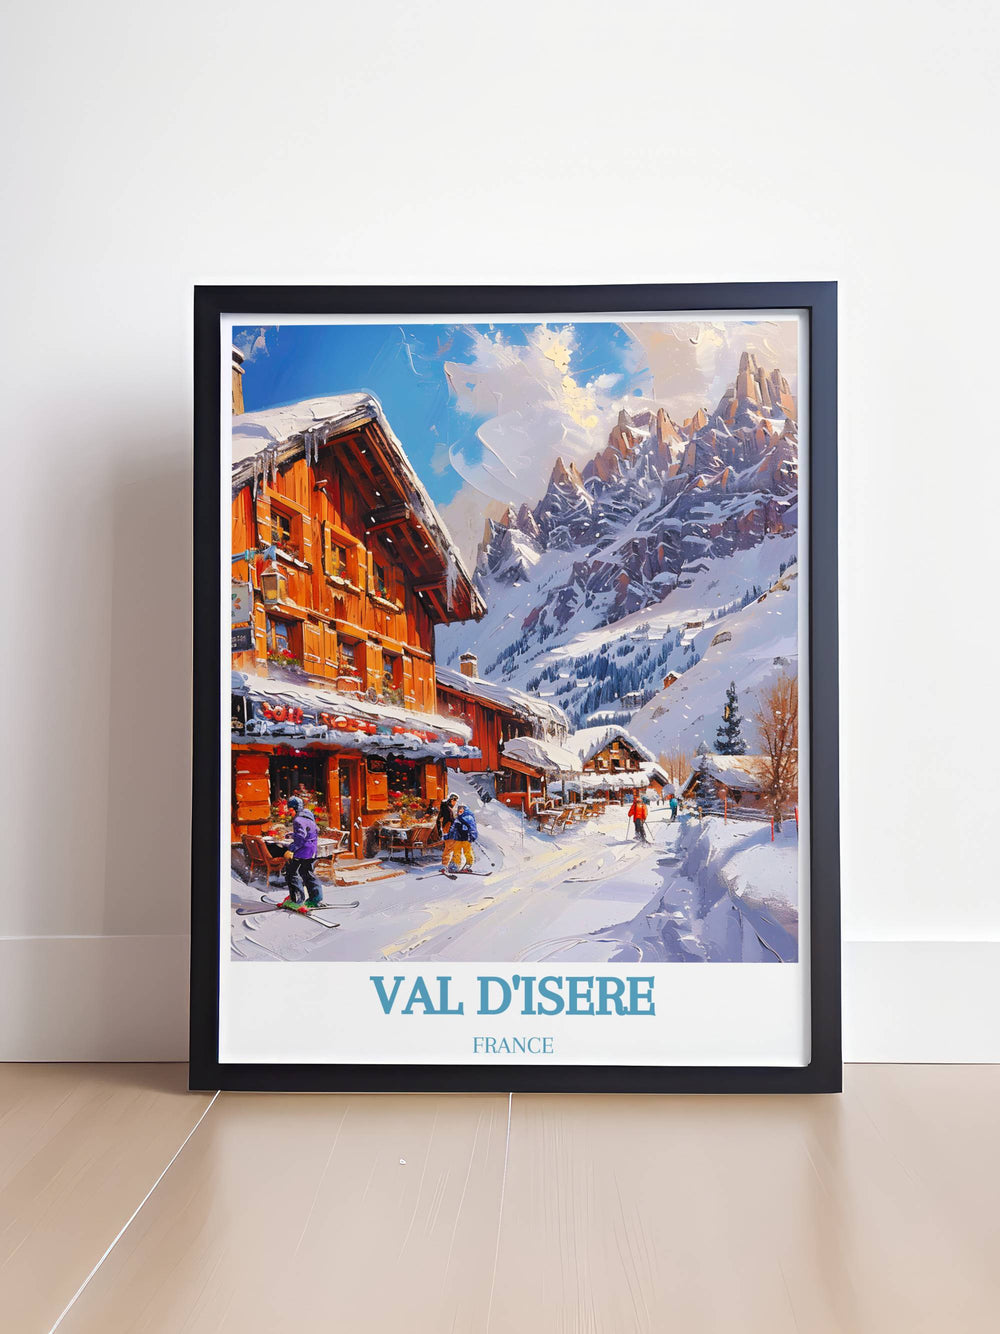 Val dIsère Solaise art print showcasing the serene beauty of one of Frances premier ski destinations. Ideal for adding a touch of adventure and elegance to your living space.